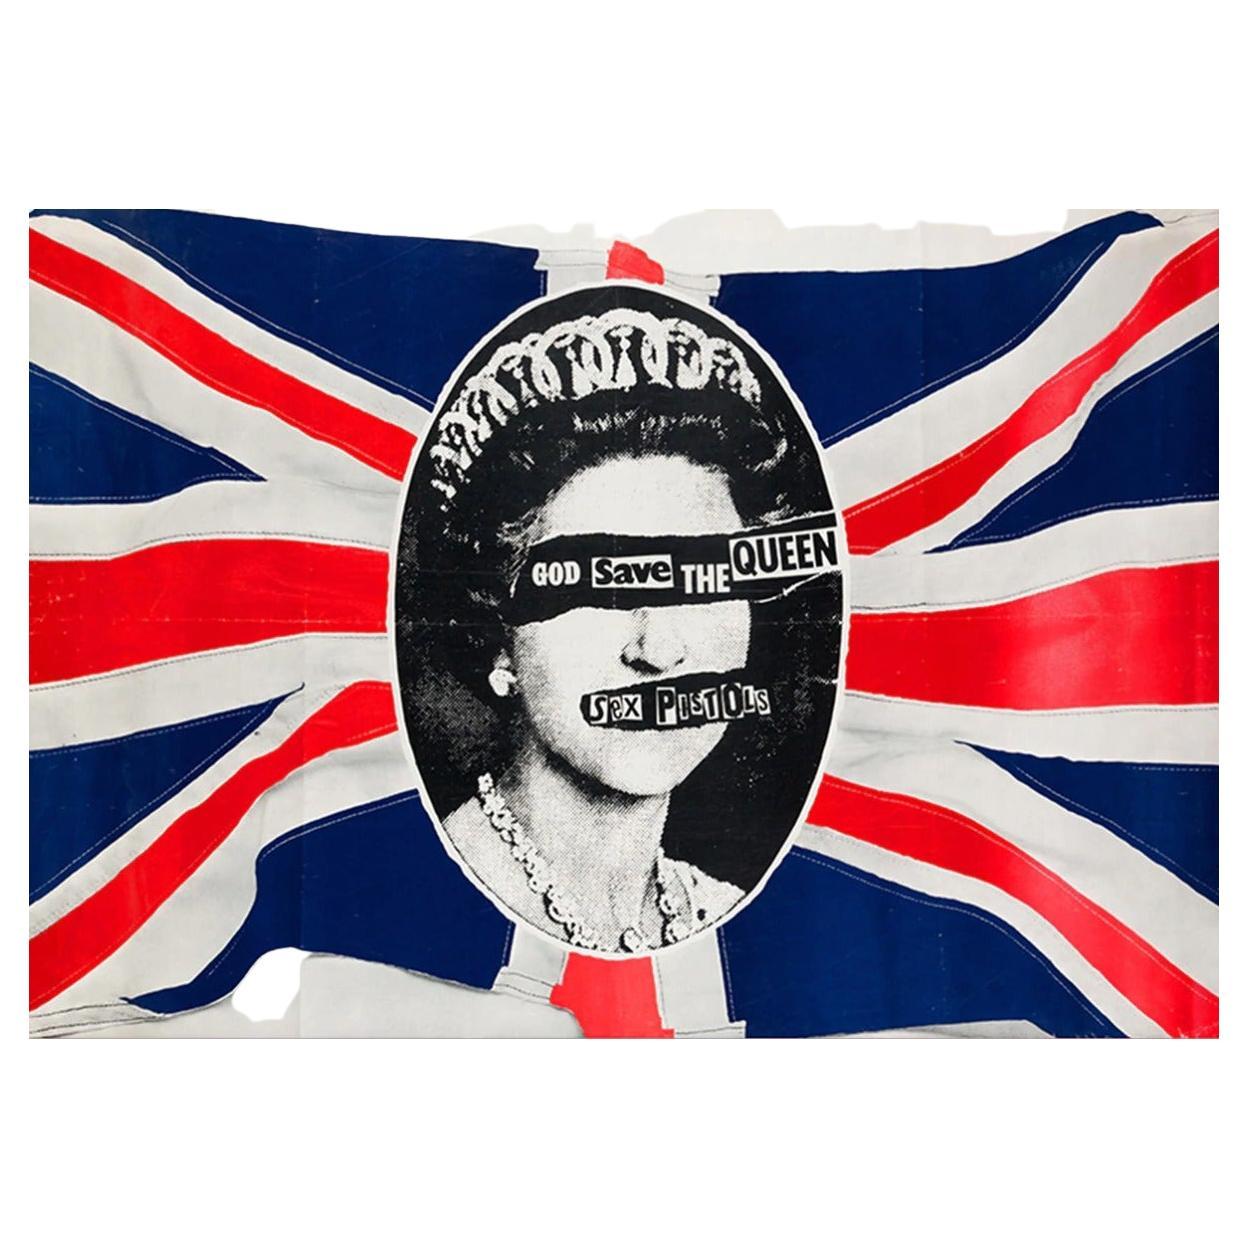 "Sex Pistols - God Save The Queen", Poster, 1977